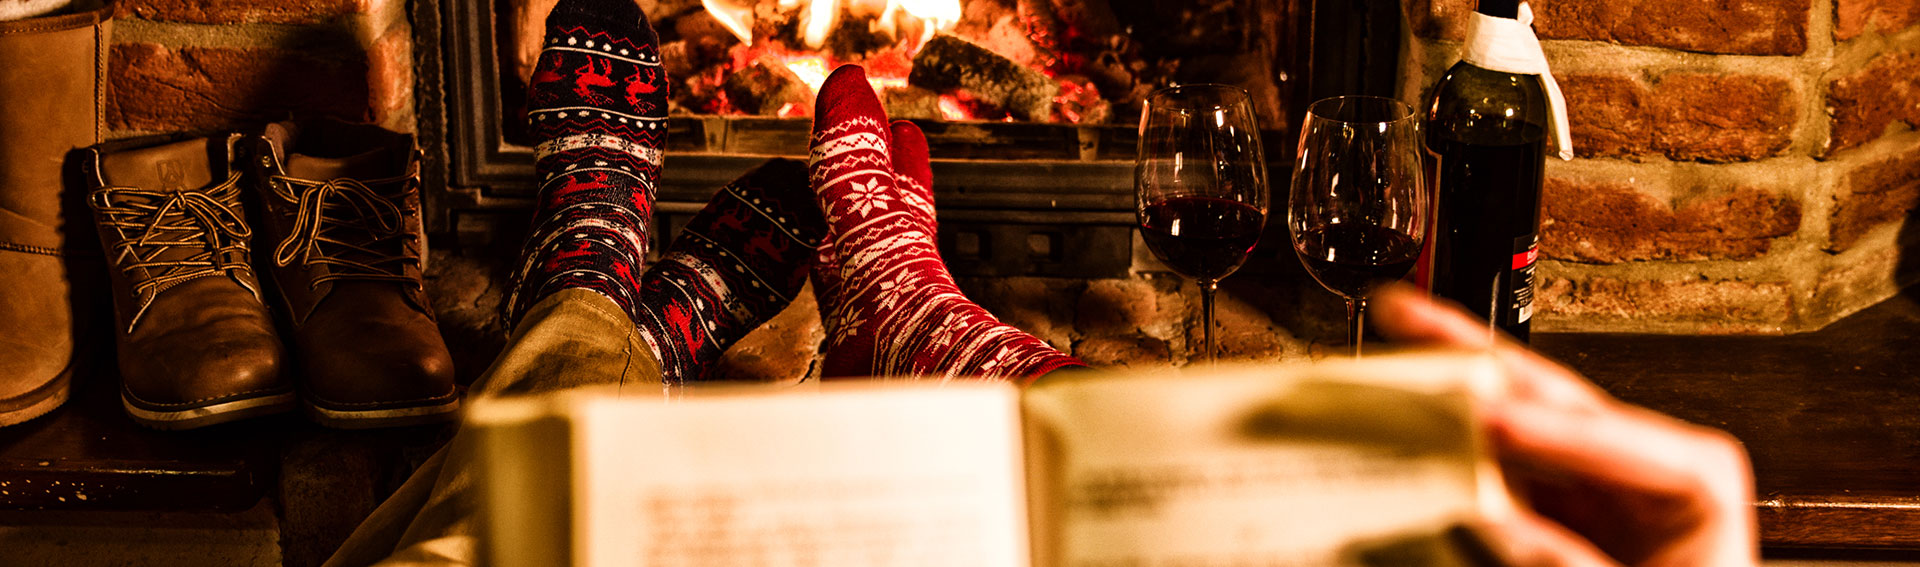 post image What We’re Reading & Watching This Holiday Season